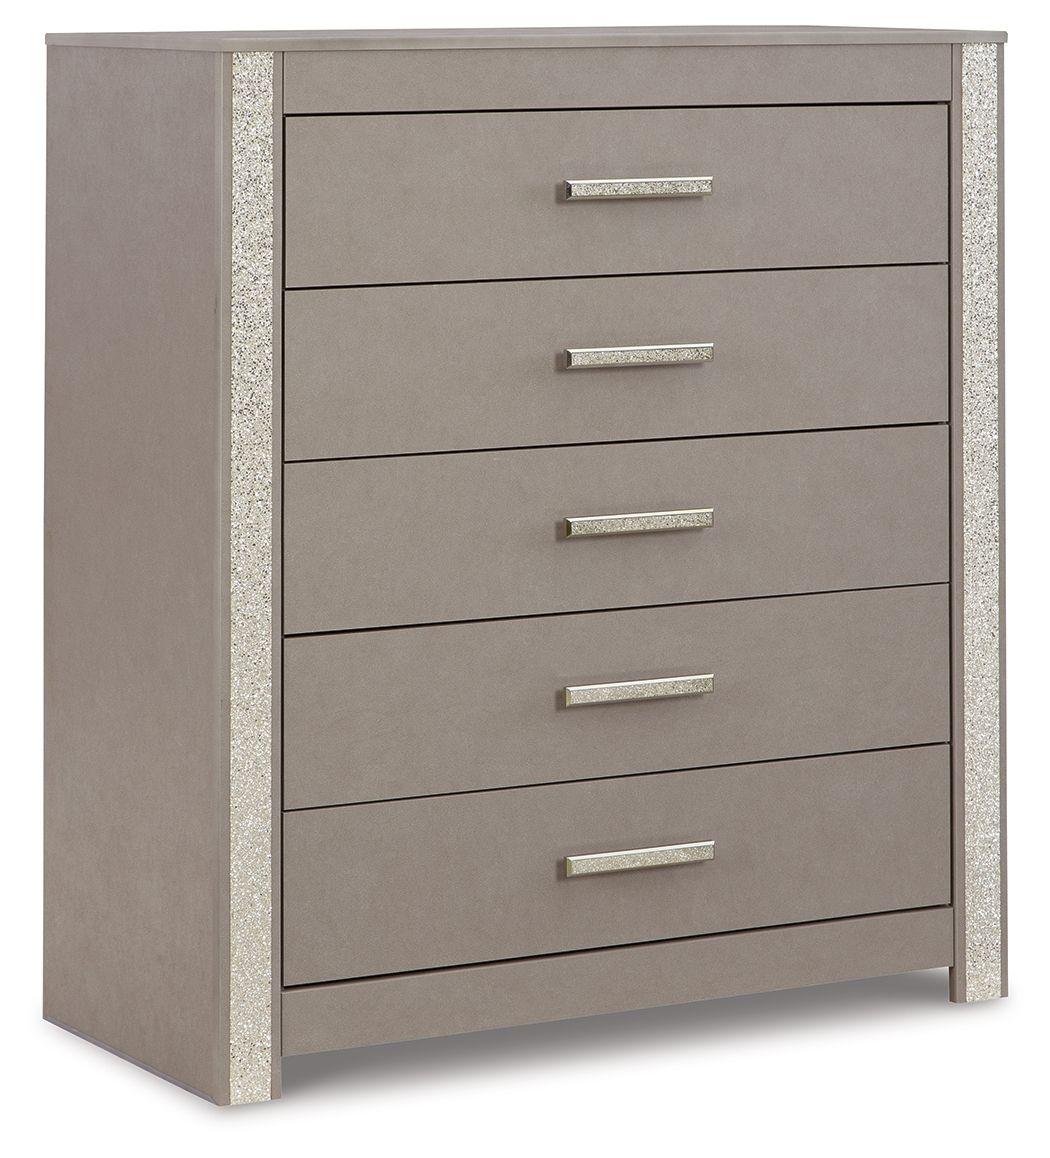 Signature Design by Ashley® - Surancha - Gray - Five Drawer Wide Chest - 5th Avenue Furniture